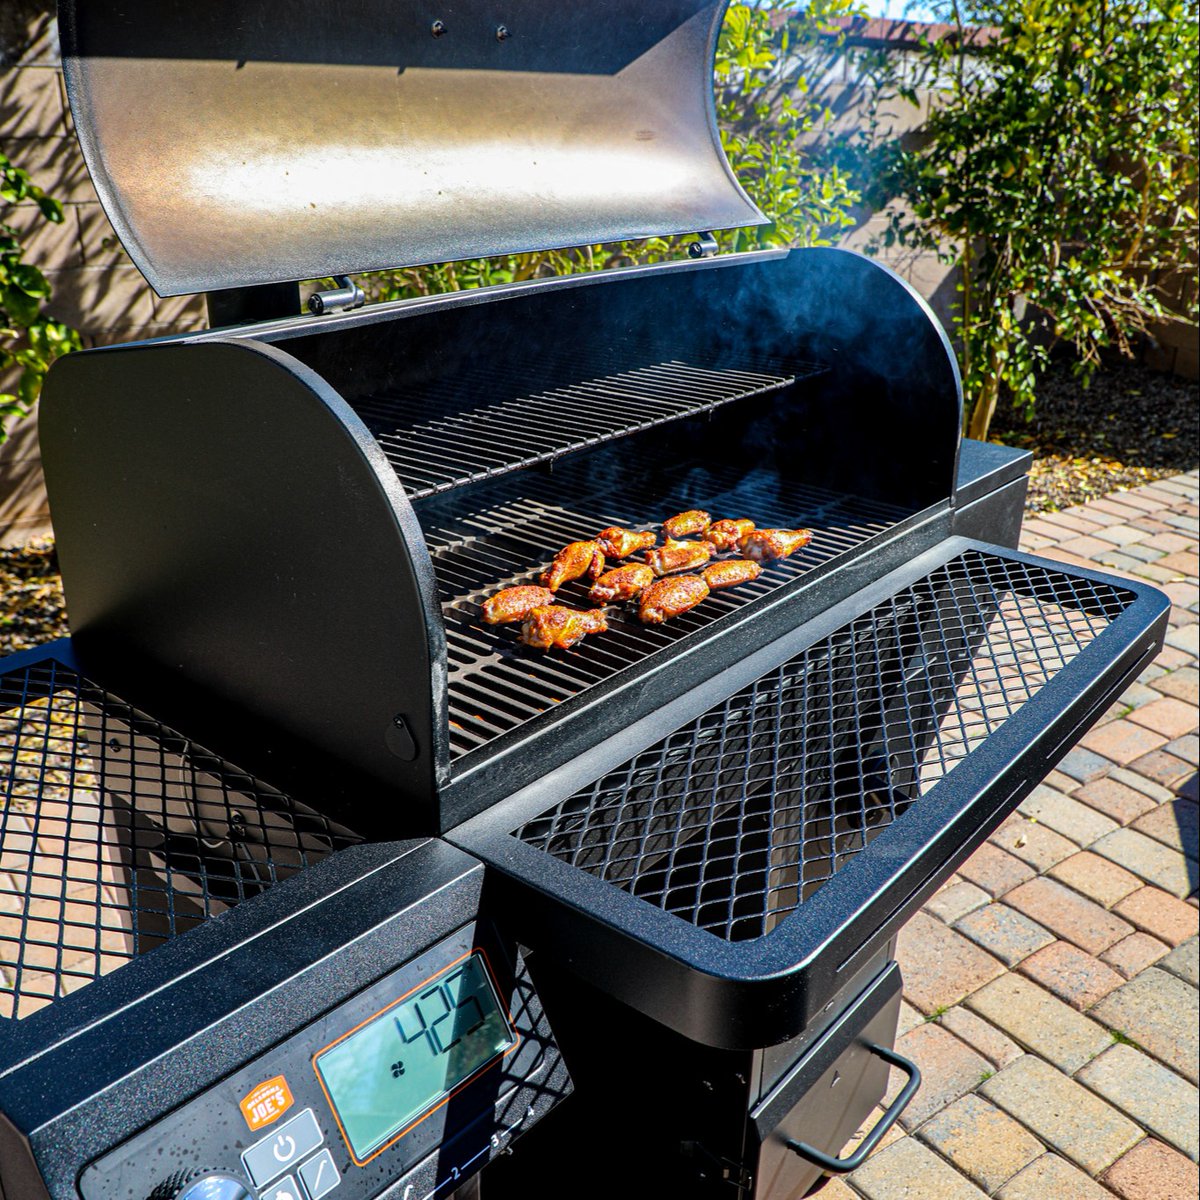 Wings like this? The Tahoma 900 has 'em on lock. Stretch your range from 225°to 600°F for a tender inside and a crispy outside. Available at @Lowes. 📸: @bonappeteach oklahomajoes.com/tahoma-900 #OklahomaJoes #OKJ #RealSmokeFlavor #Tahoma #Tahoma900